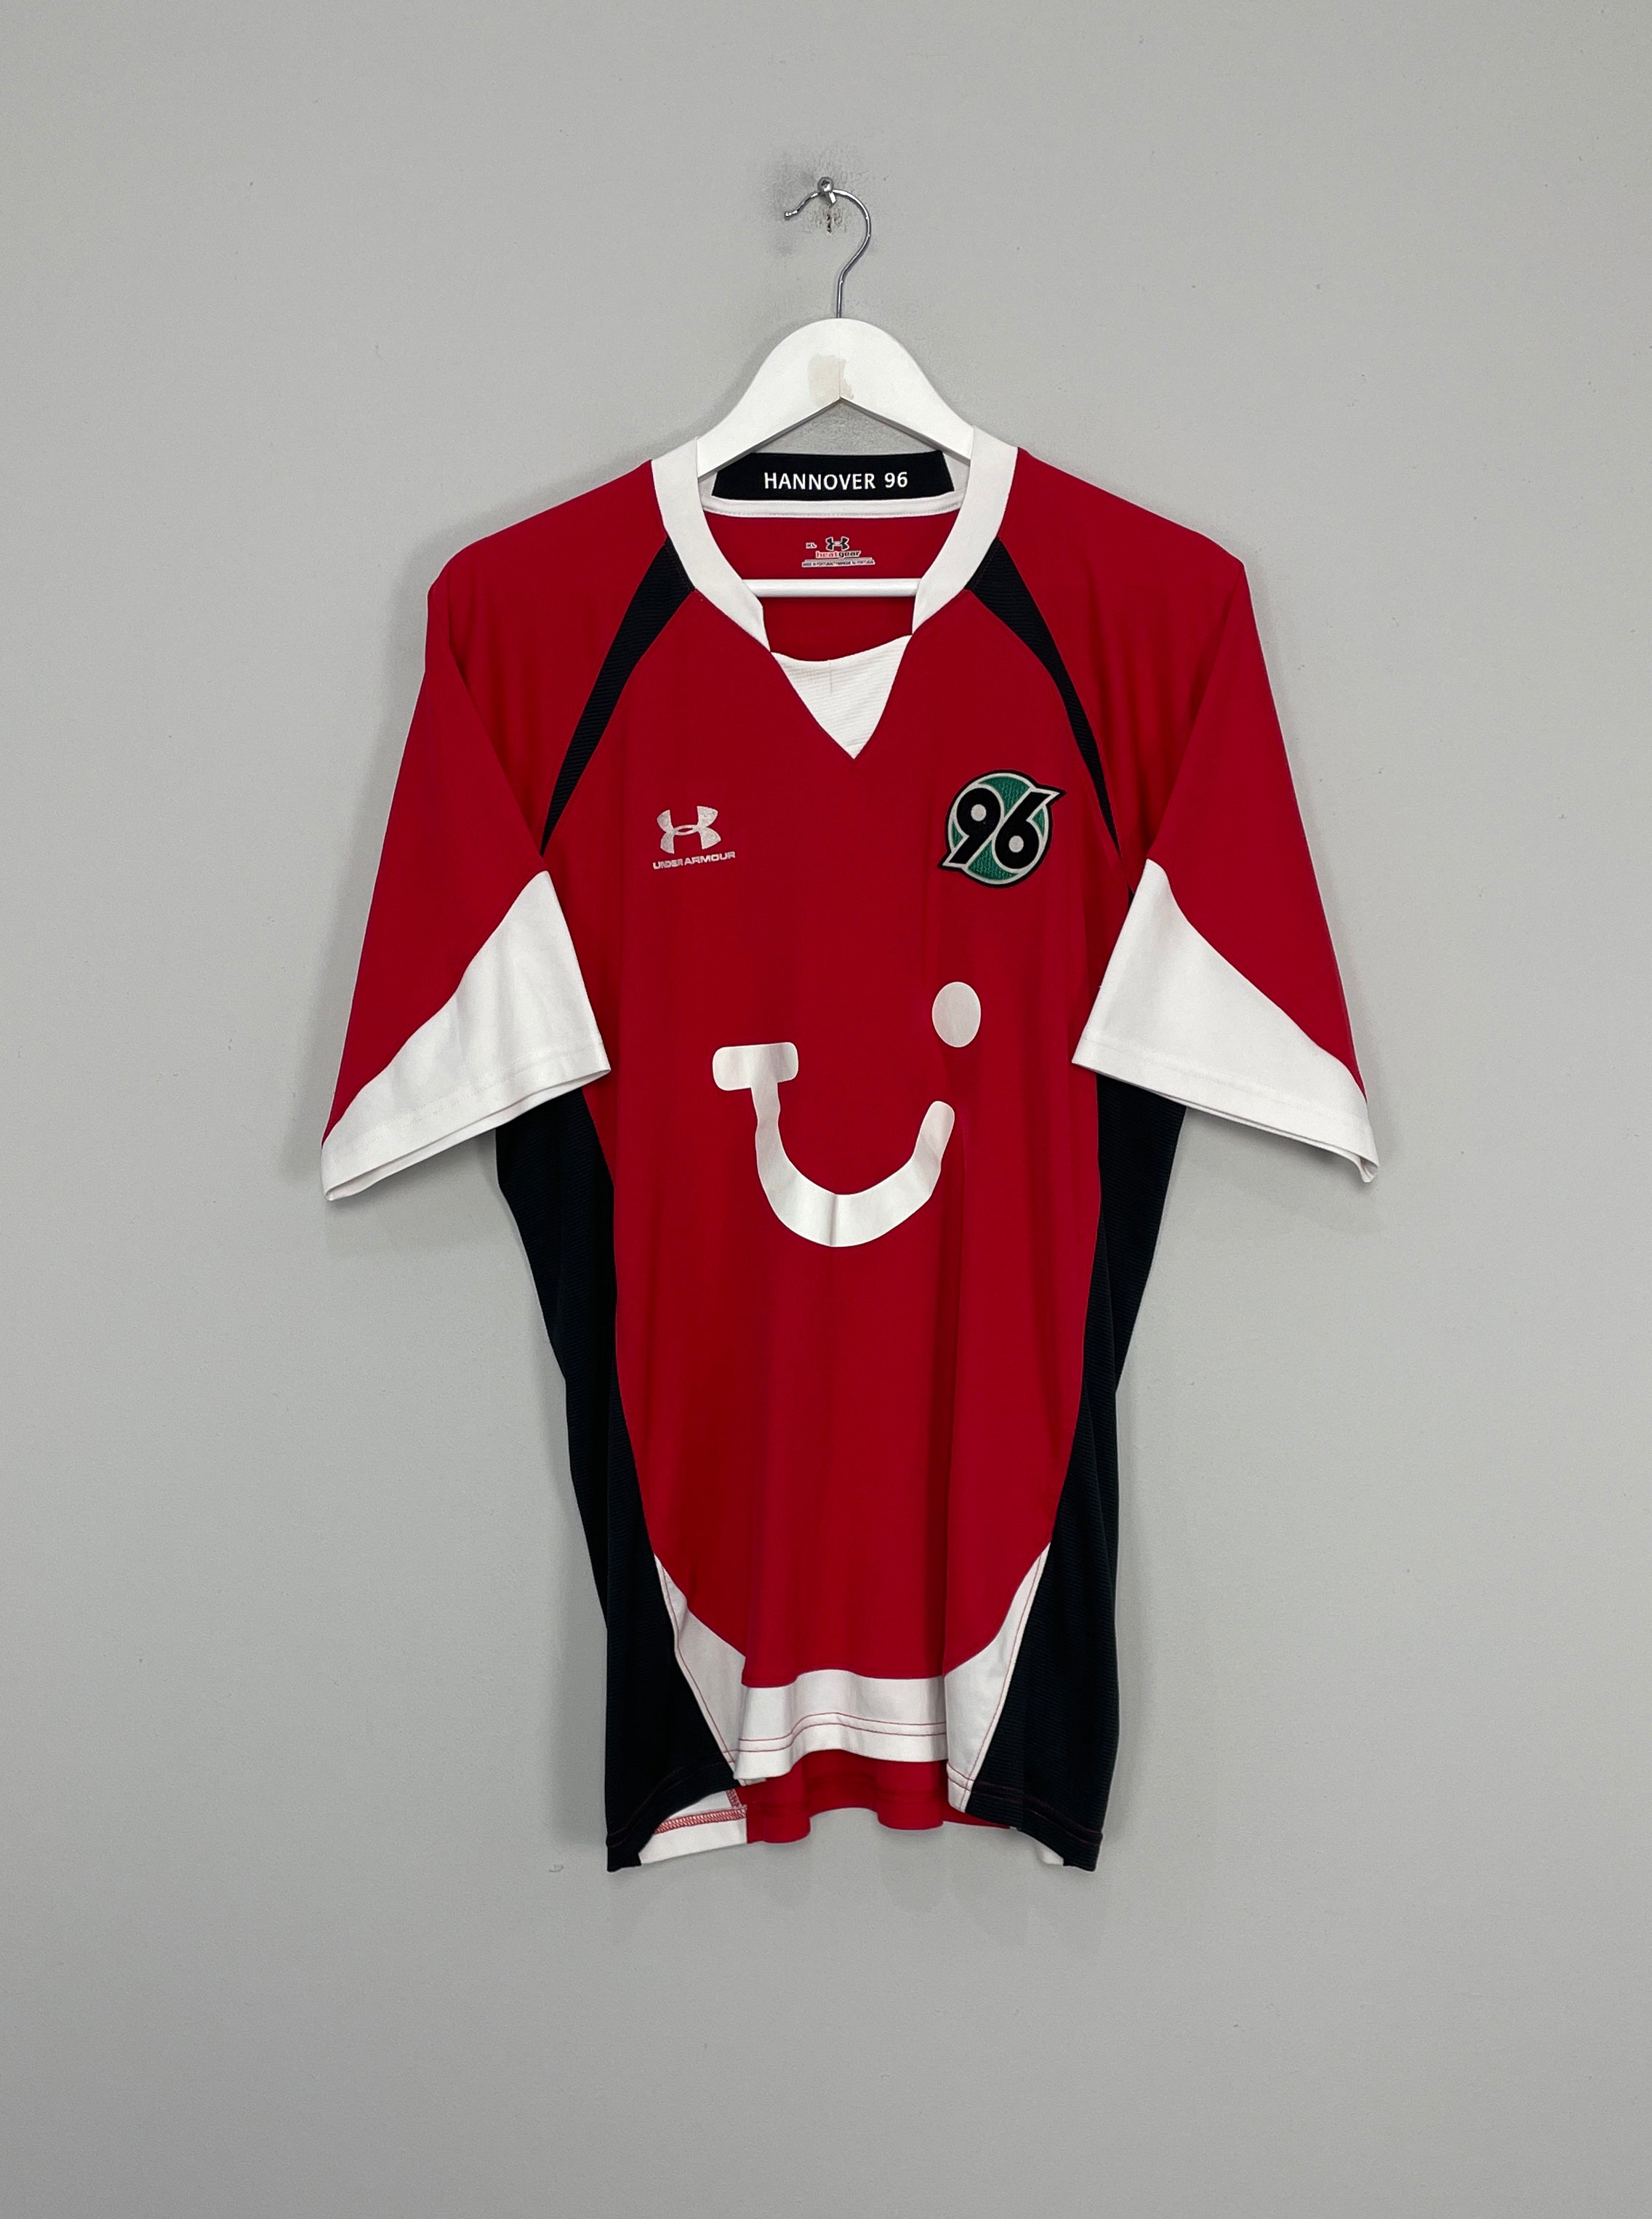 collegegeld Brutaal galop CULT KITS - 2009/10 HANNOVER HOME SHIRT (XL) UNDER ARMOUR – Cult Kits